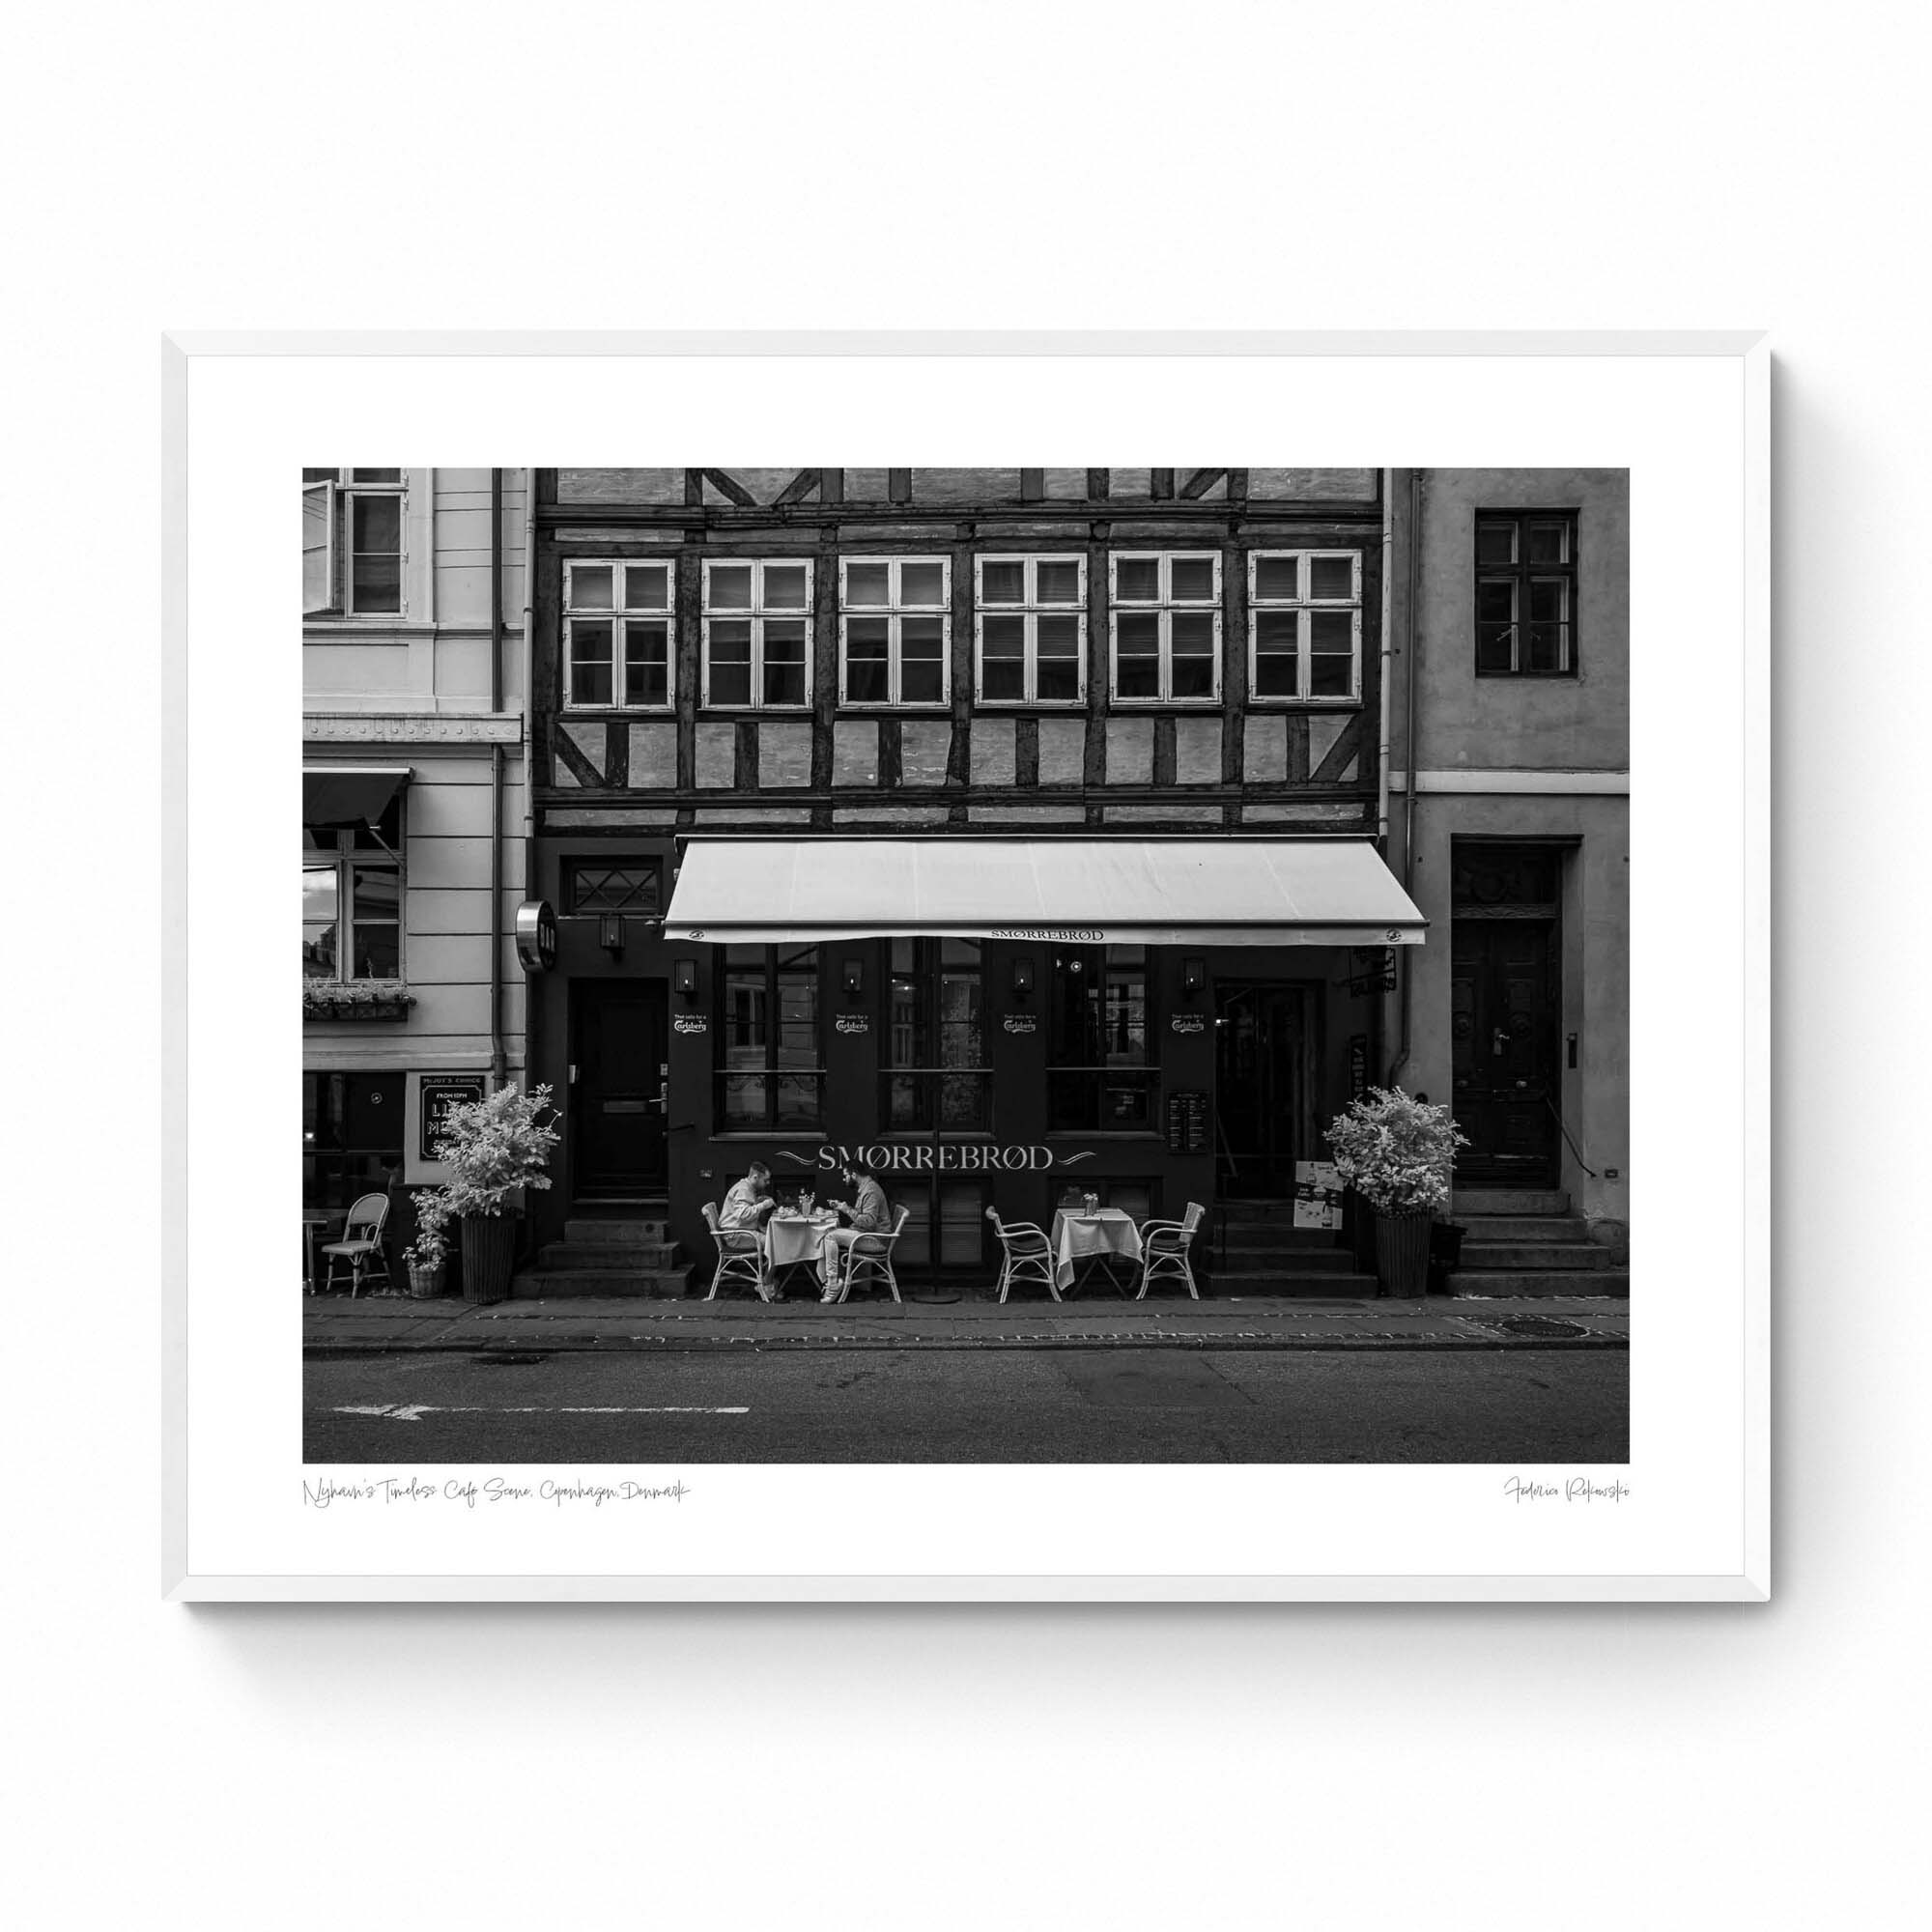 Black and white photo of a traditional Danish Smørrebrød café in Nyhavn, Copenhagen, with outdoor seating and historical buildings.